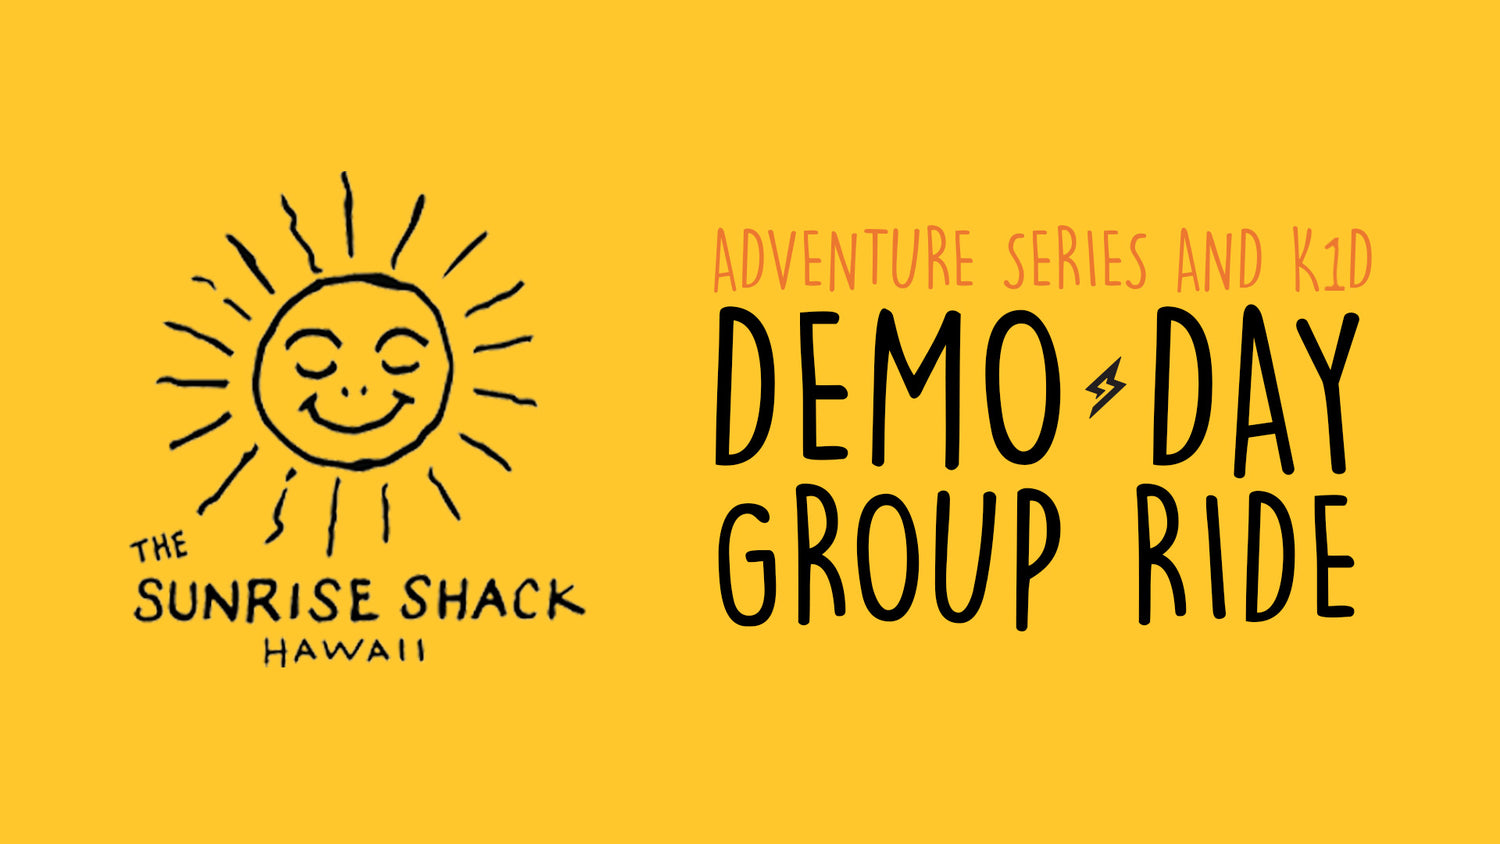 The Sunrise Shack Hawaii Adventure Series and K1D demo day group ride.